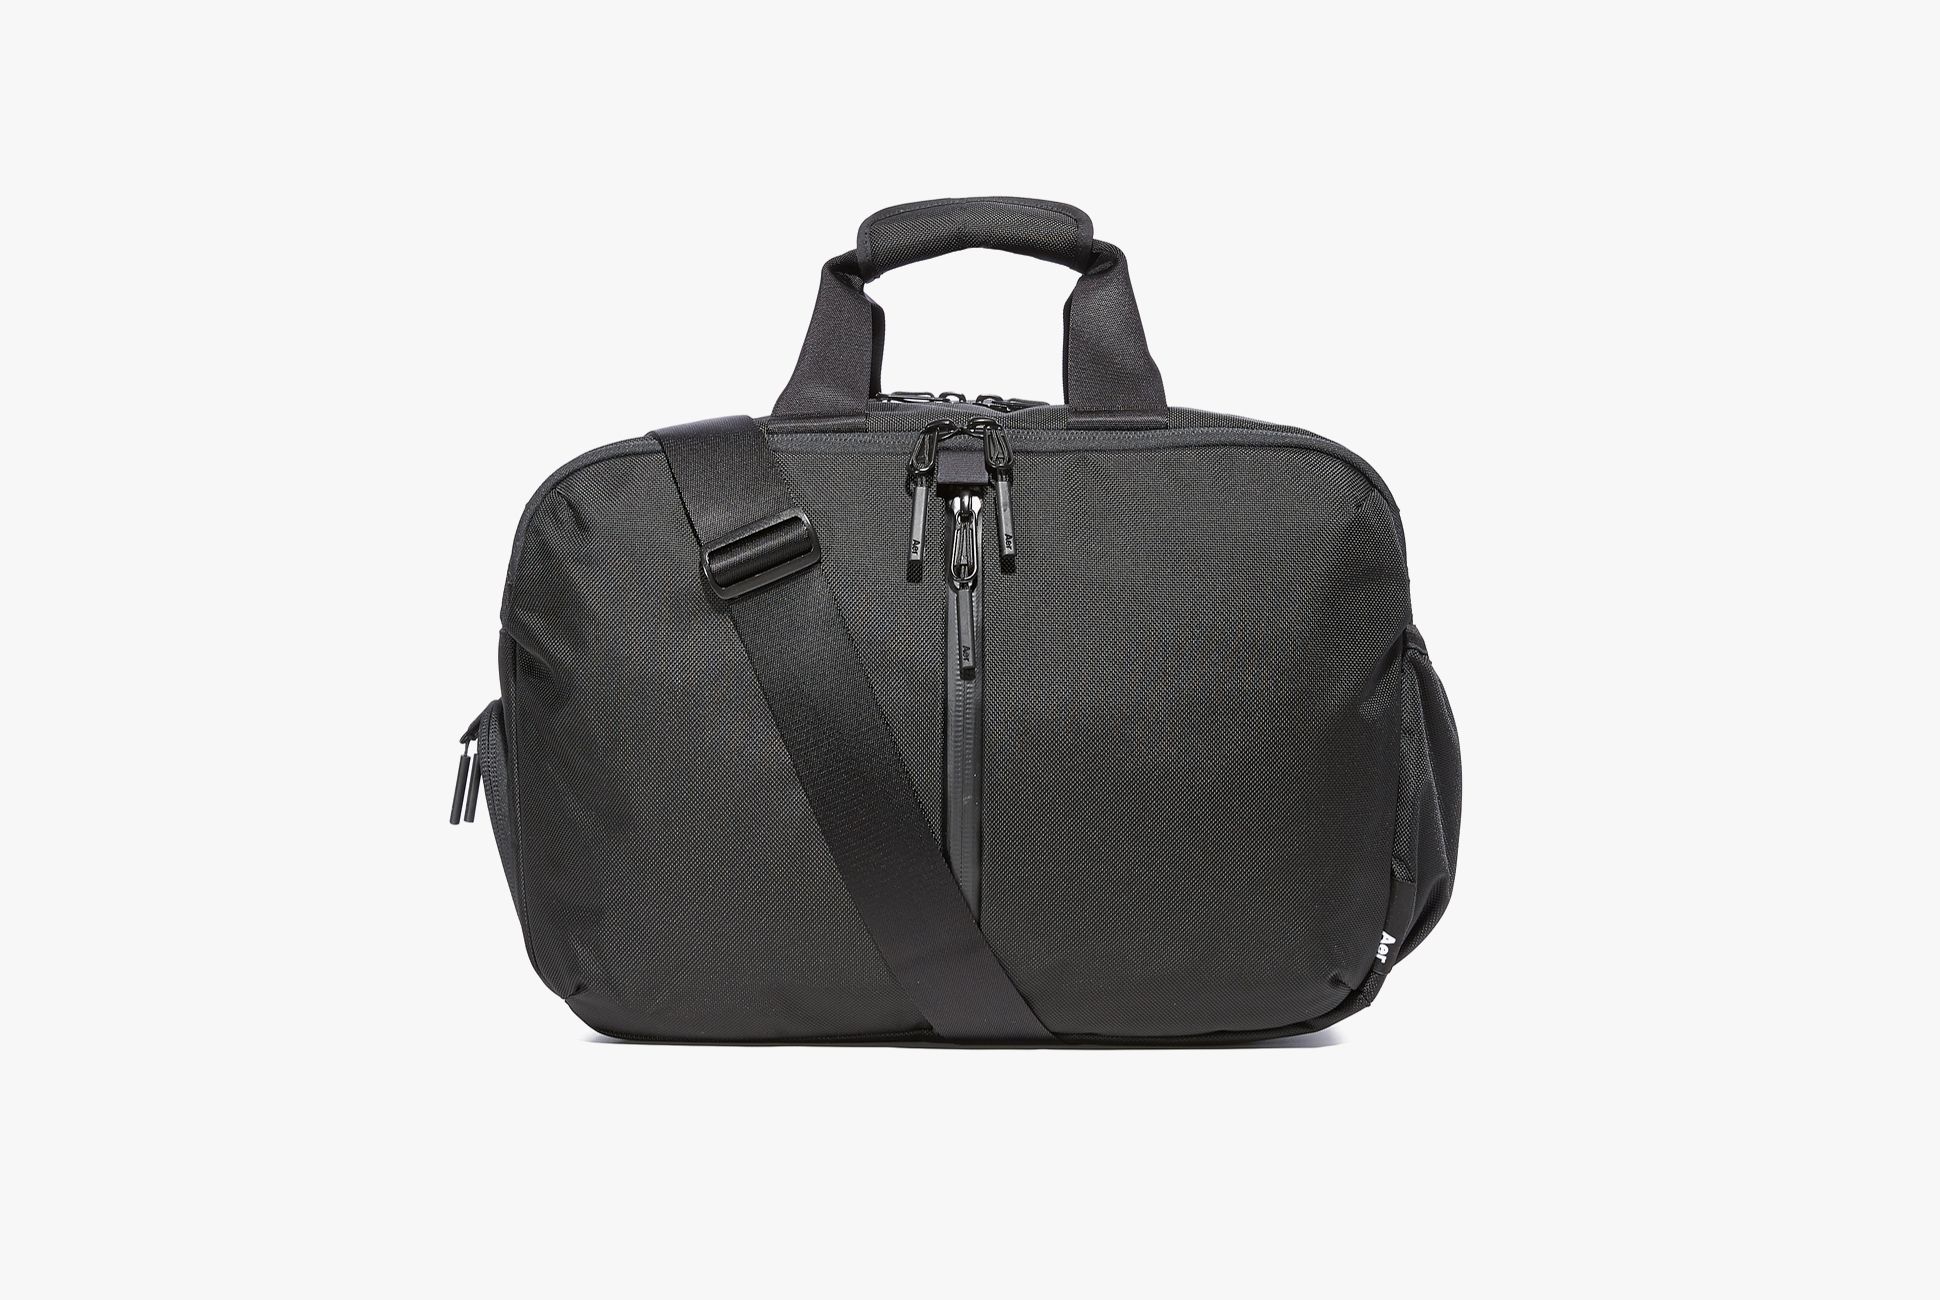 top rated gym bags